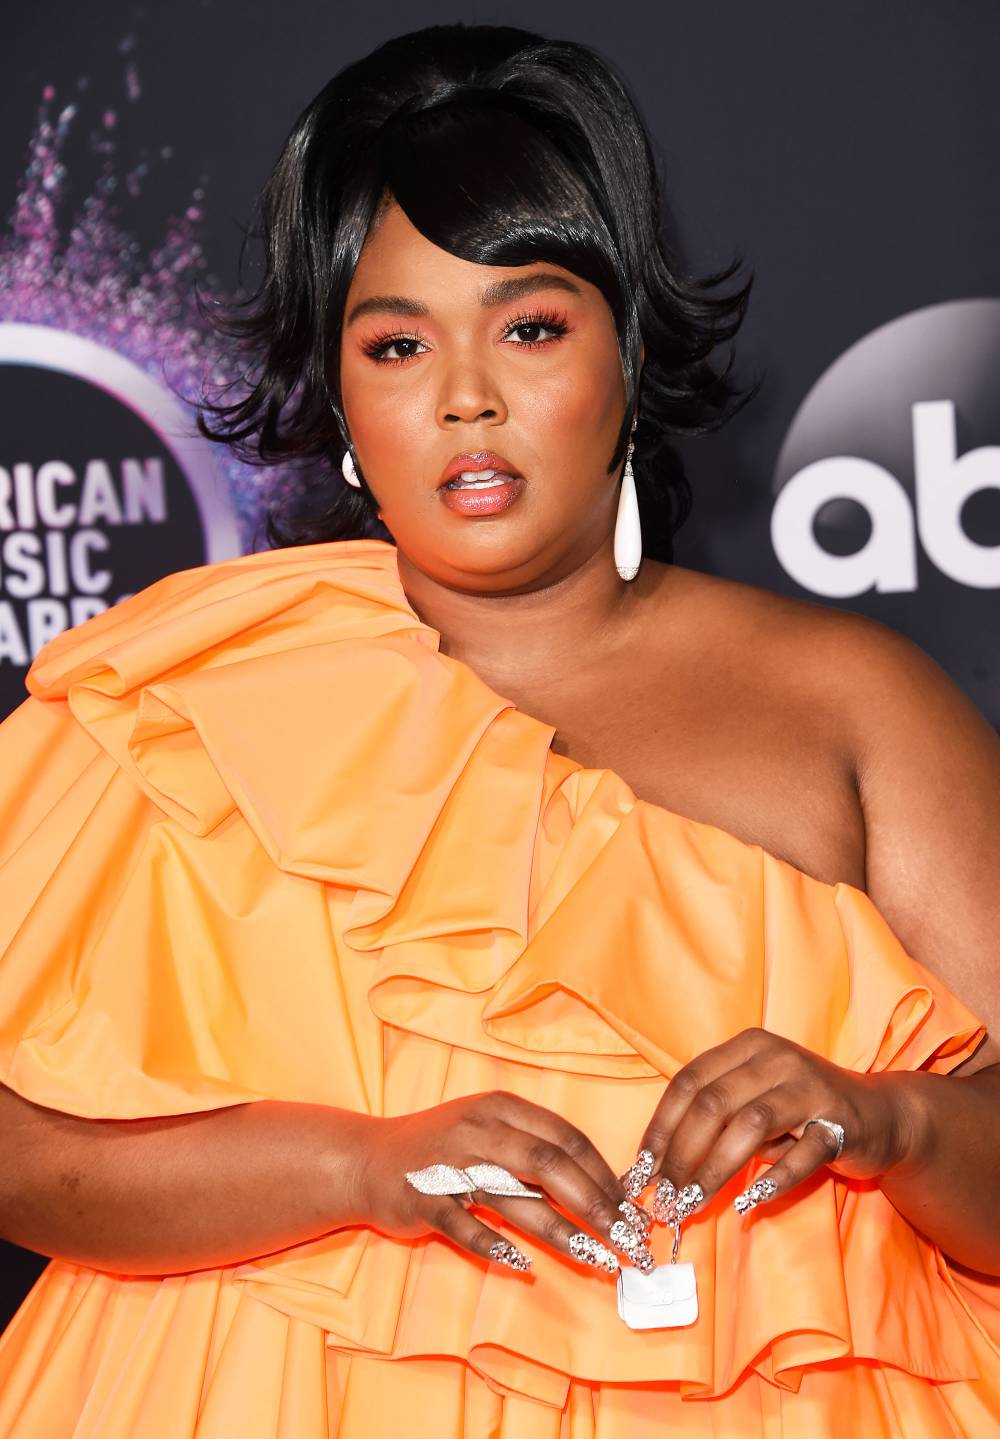 Lizzo Posts TikTok Video Pulling Random Items Out of a Tiny Purse